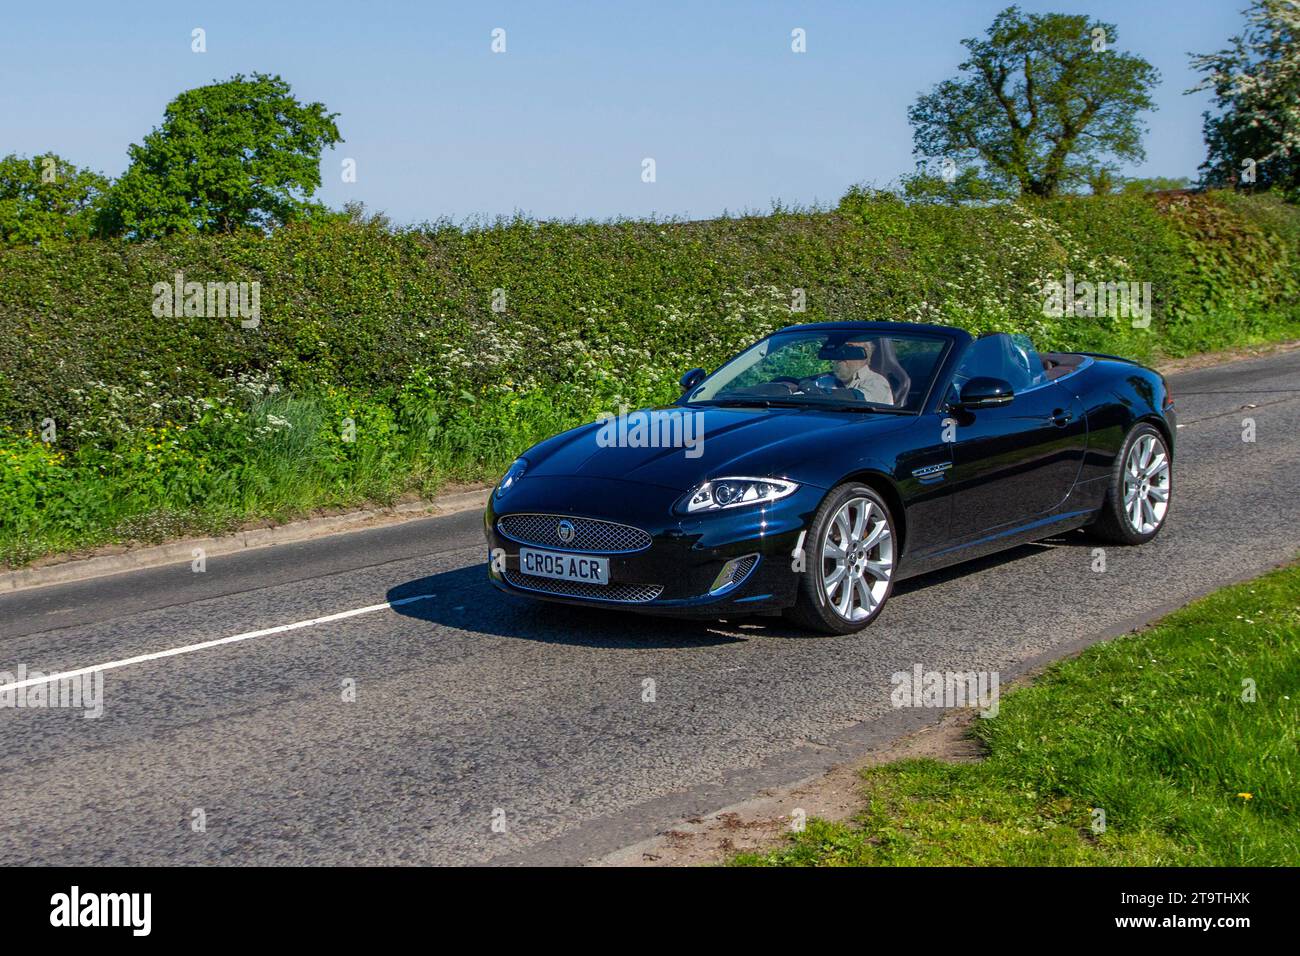 2013 Black Jaguar Artisan Special Edition, XK Base Project 7 5000 cc petrol roadster, 2+2 grand tourer;  sports and performance car enthusiasts travelling in Cheshire, UK Stock Photo